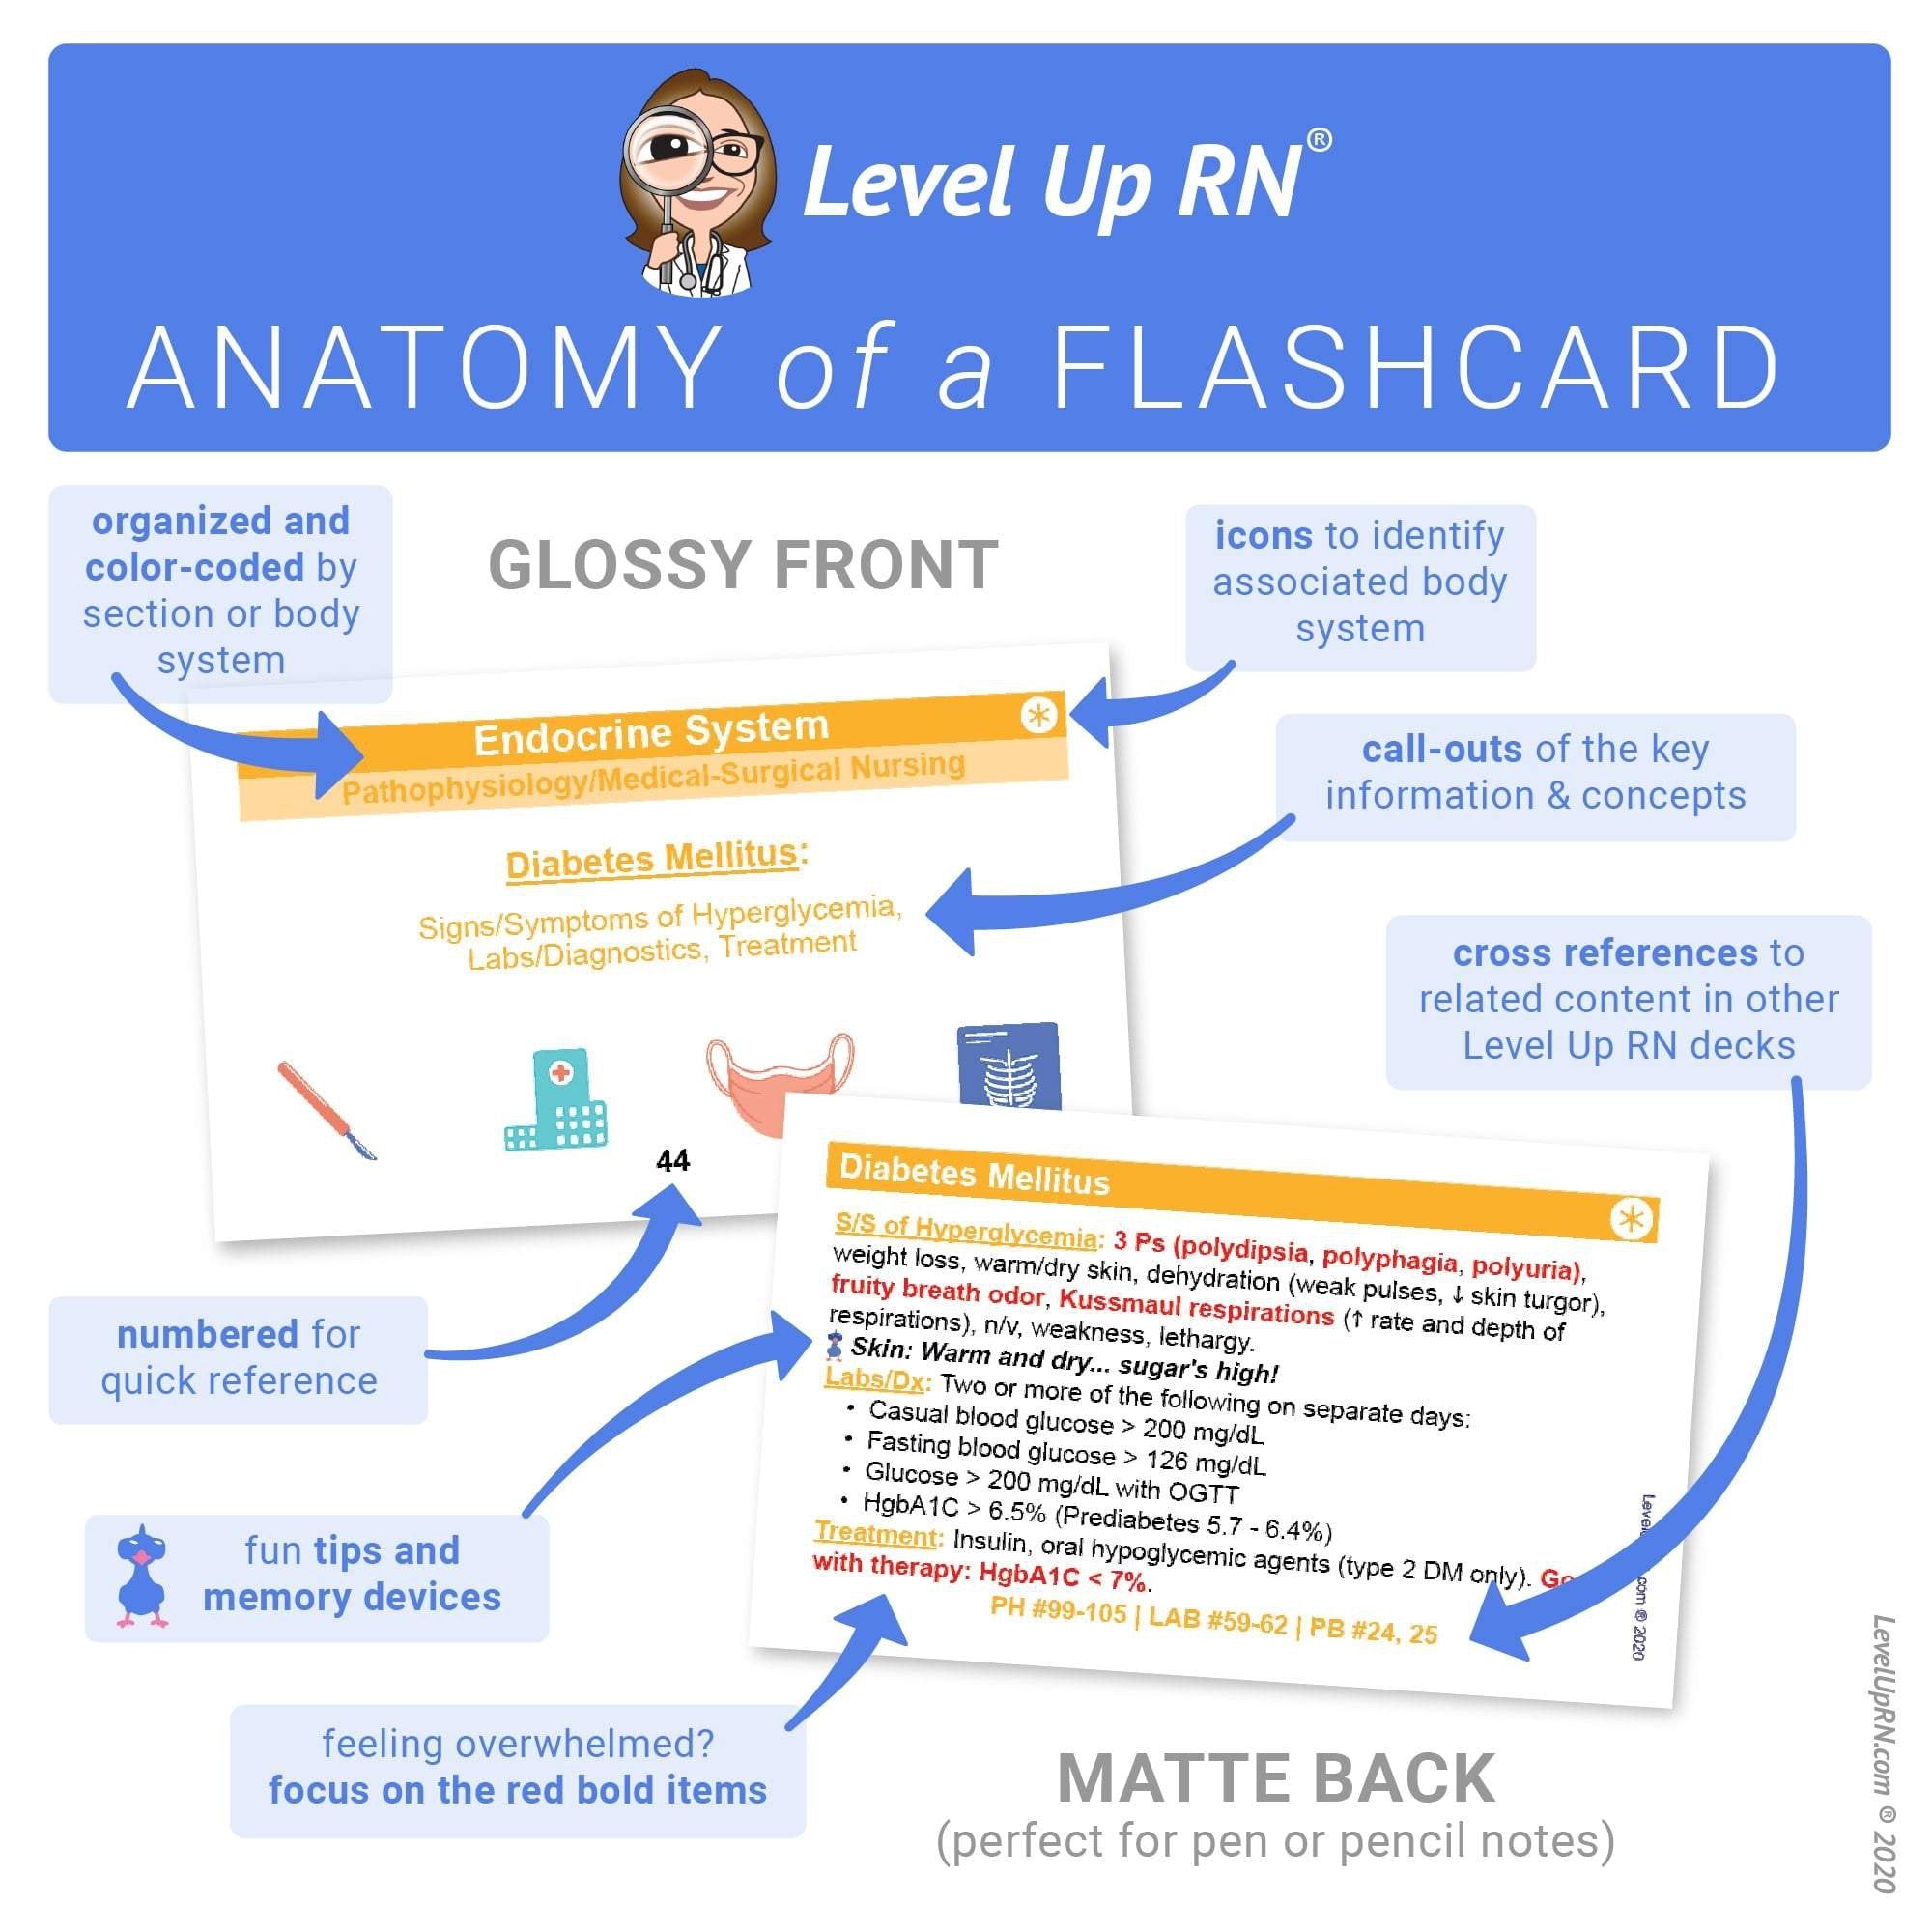 Anatomy of a Flashcard: Matte back (perfect for pen or pencil notes), Glossy front, organized and color-coded by section or body system, call-outs of the key information & concepts, icons to identify associated body system, numbered for quick reference, c